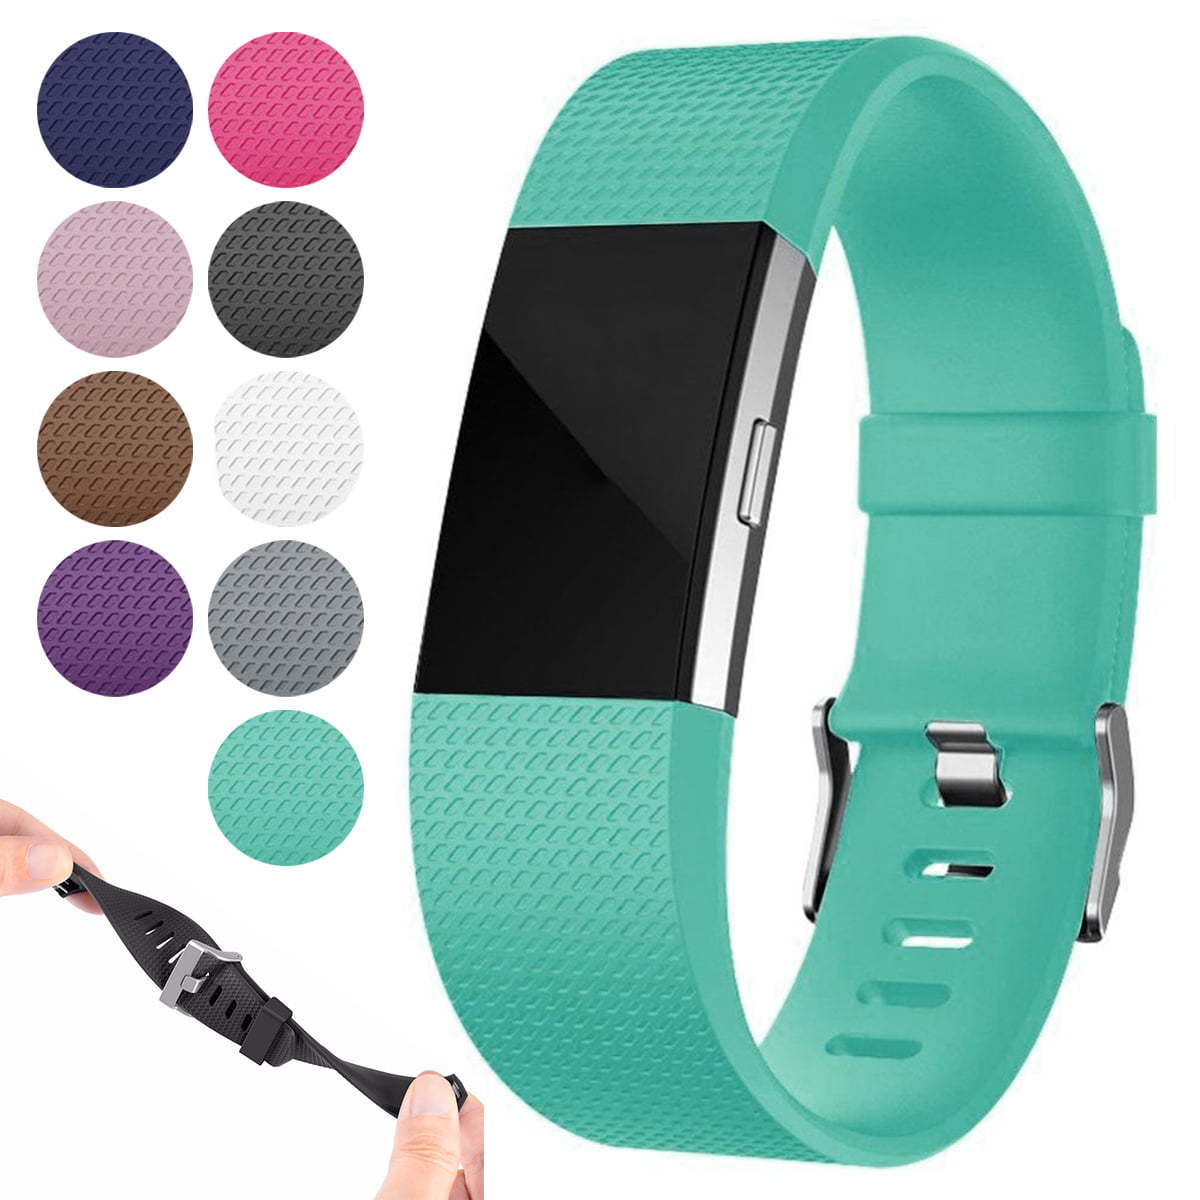 Replacement Silicon Wrist Sport Band Strap Bracelet Buckle For Fitbit Charge 2 